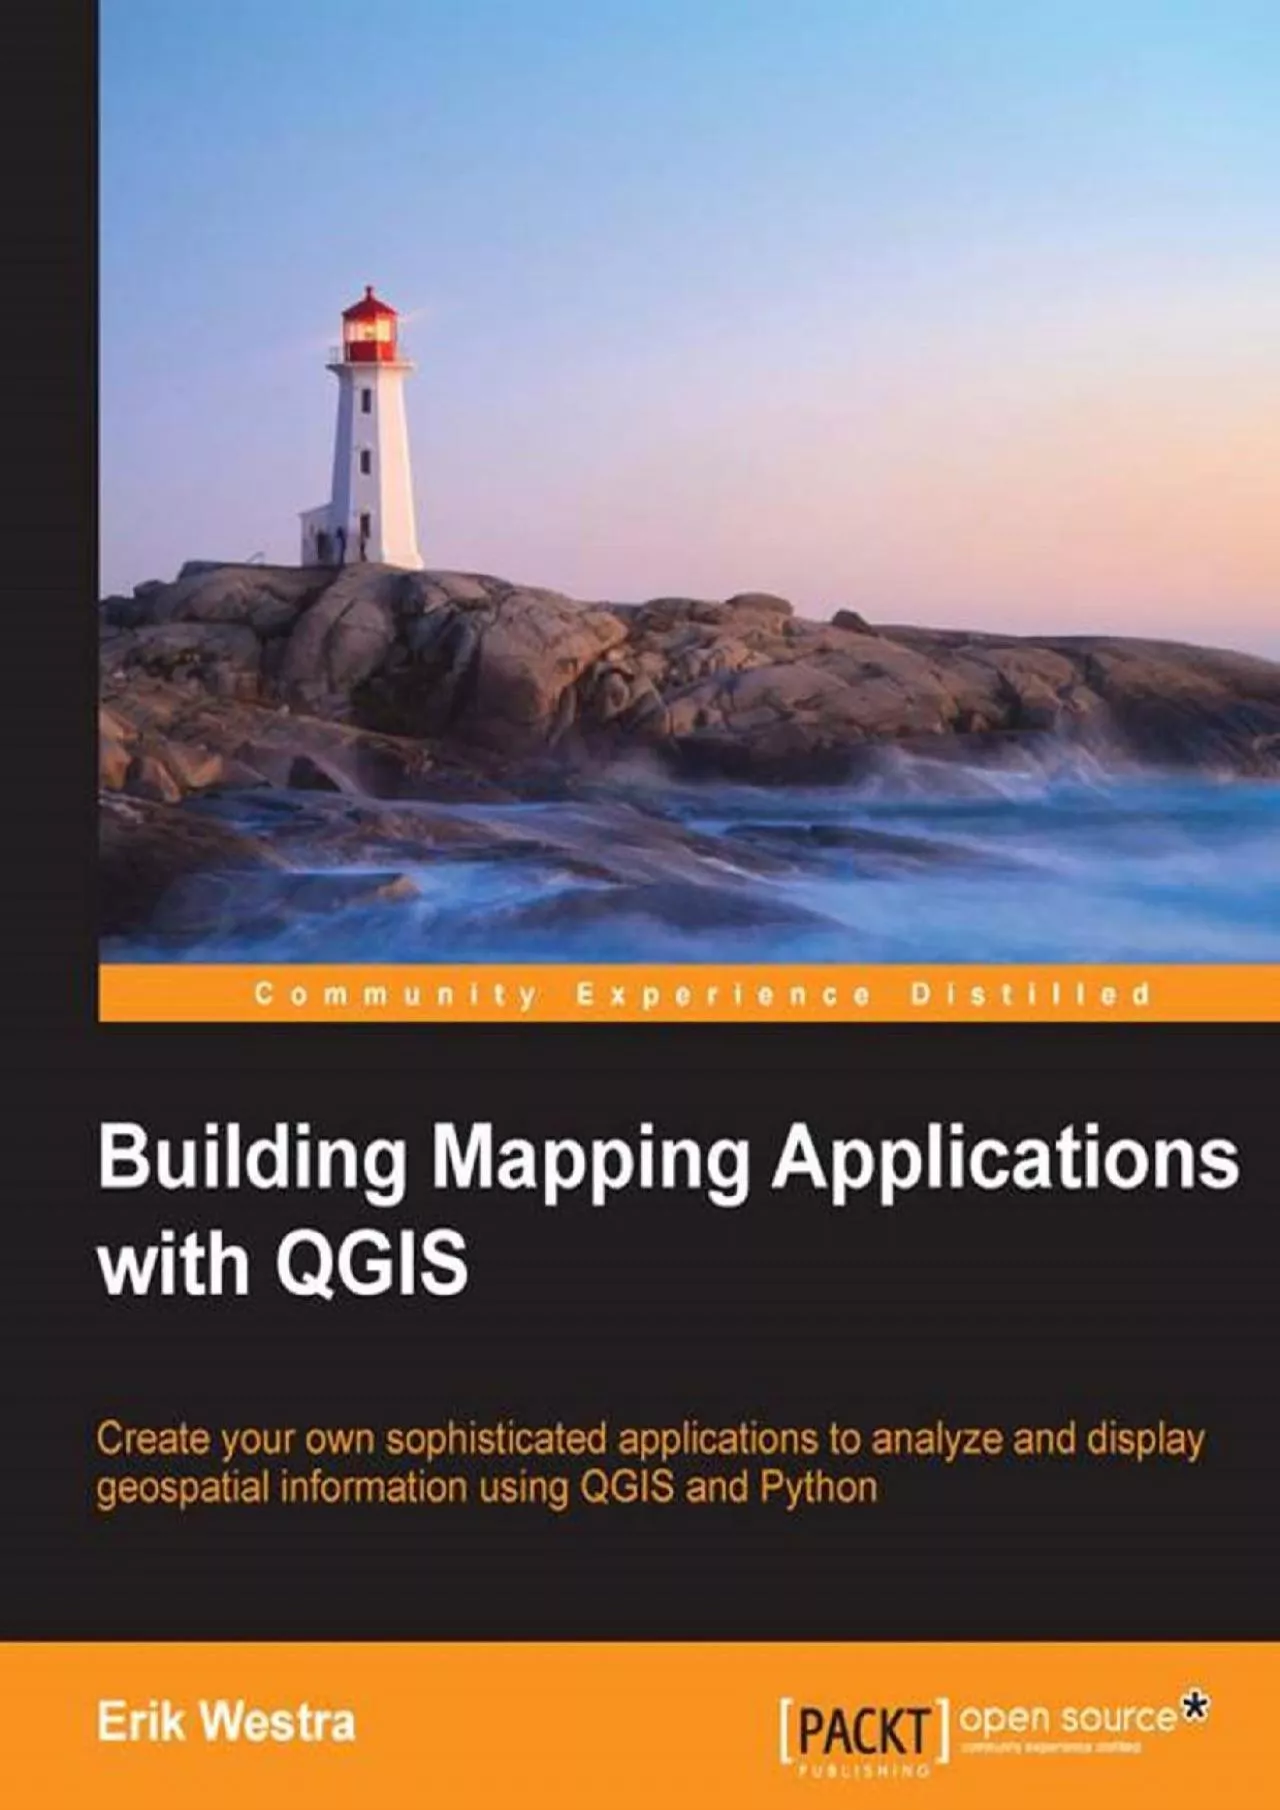 [BEST]-Building Mapping Applications with QGIS